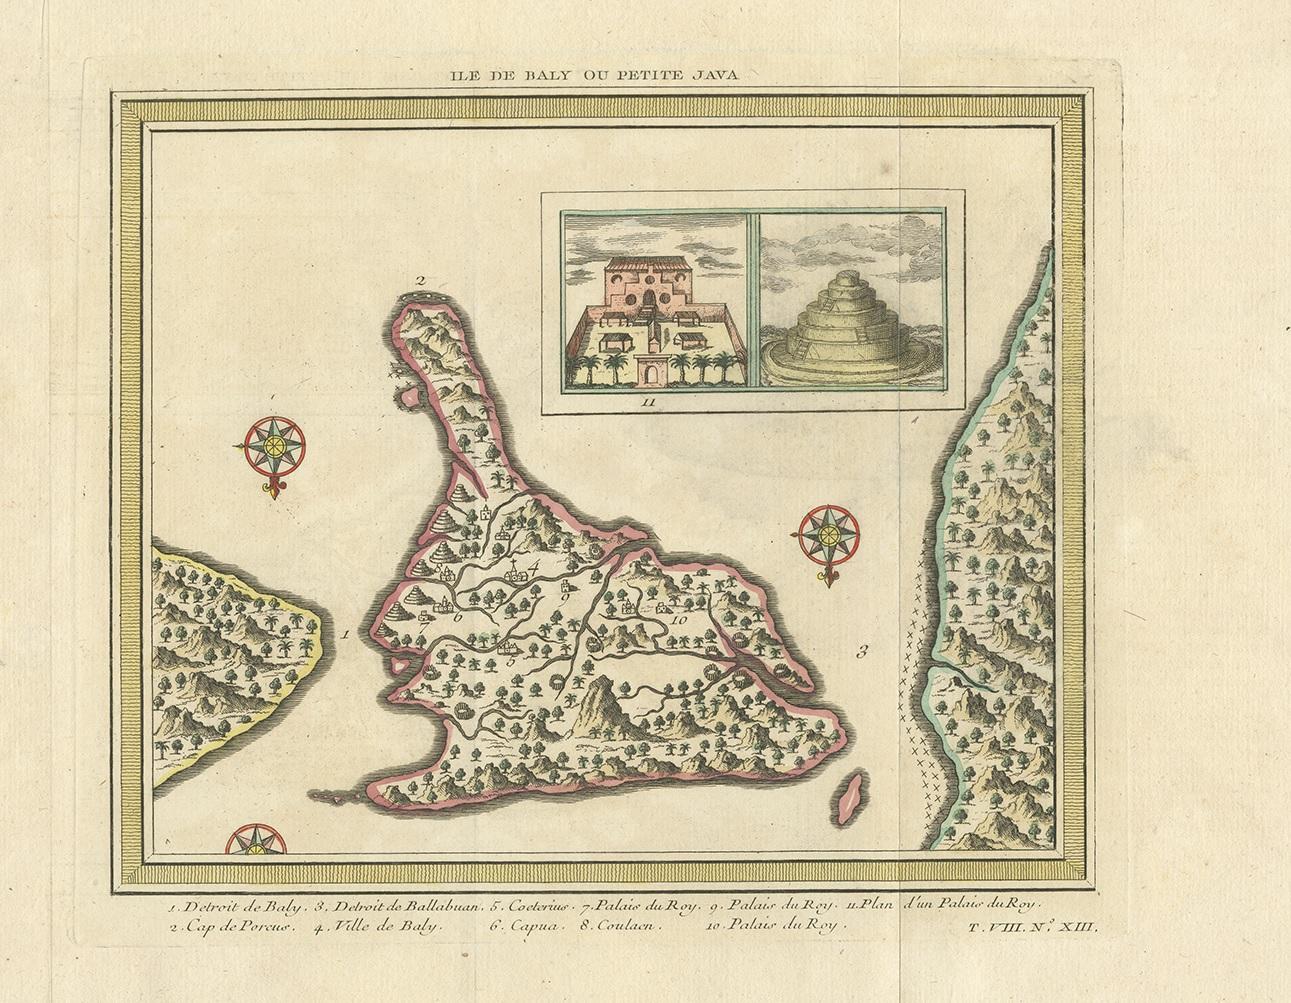 Antique map titled 'Ile de Baly ou petite Java'. Map of Bali, Indonesia. The map depicts the island from the north with Java to the right and Lombok to the left. Illustrated with an inset of the Royal Palace and a Balinese temple.